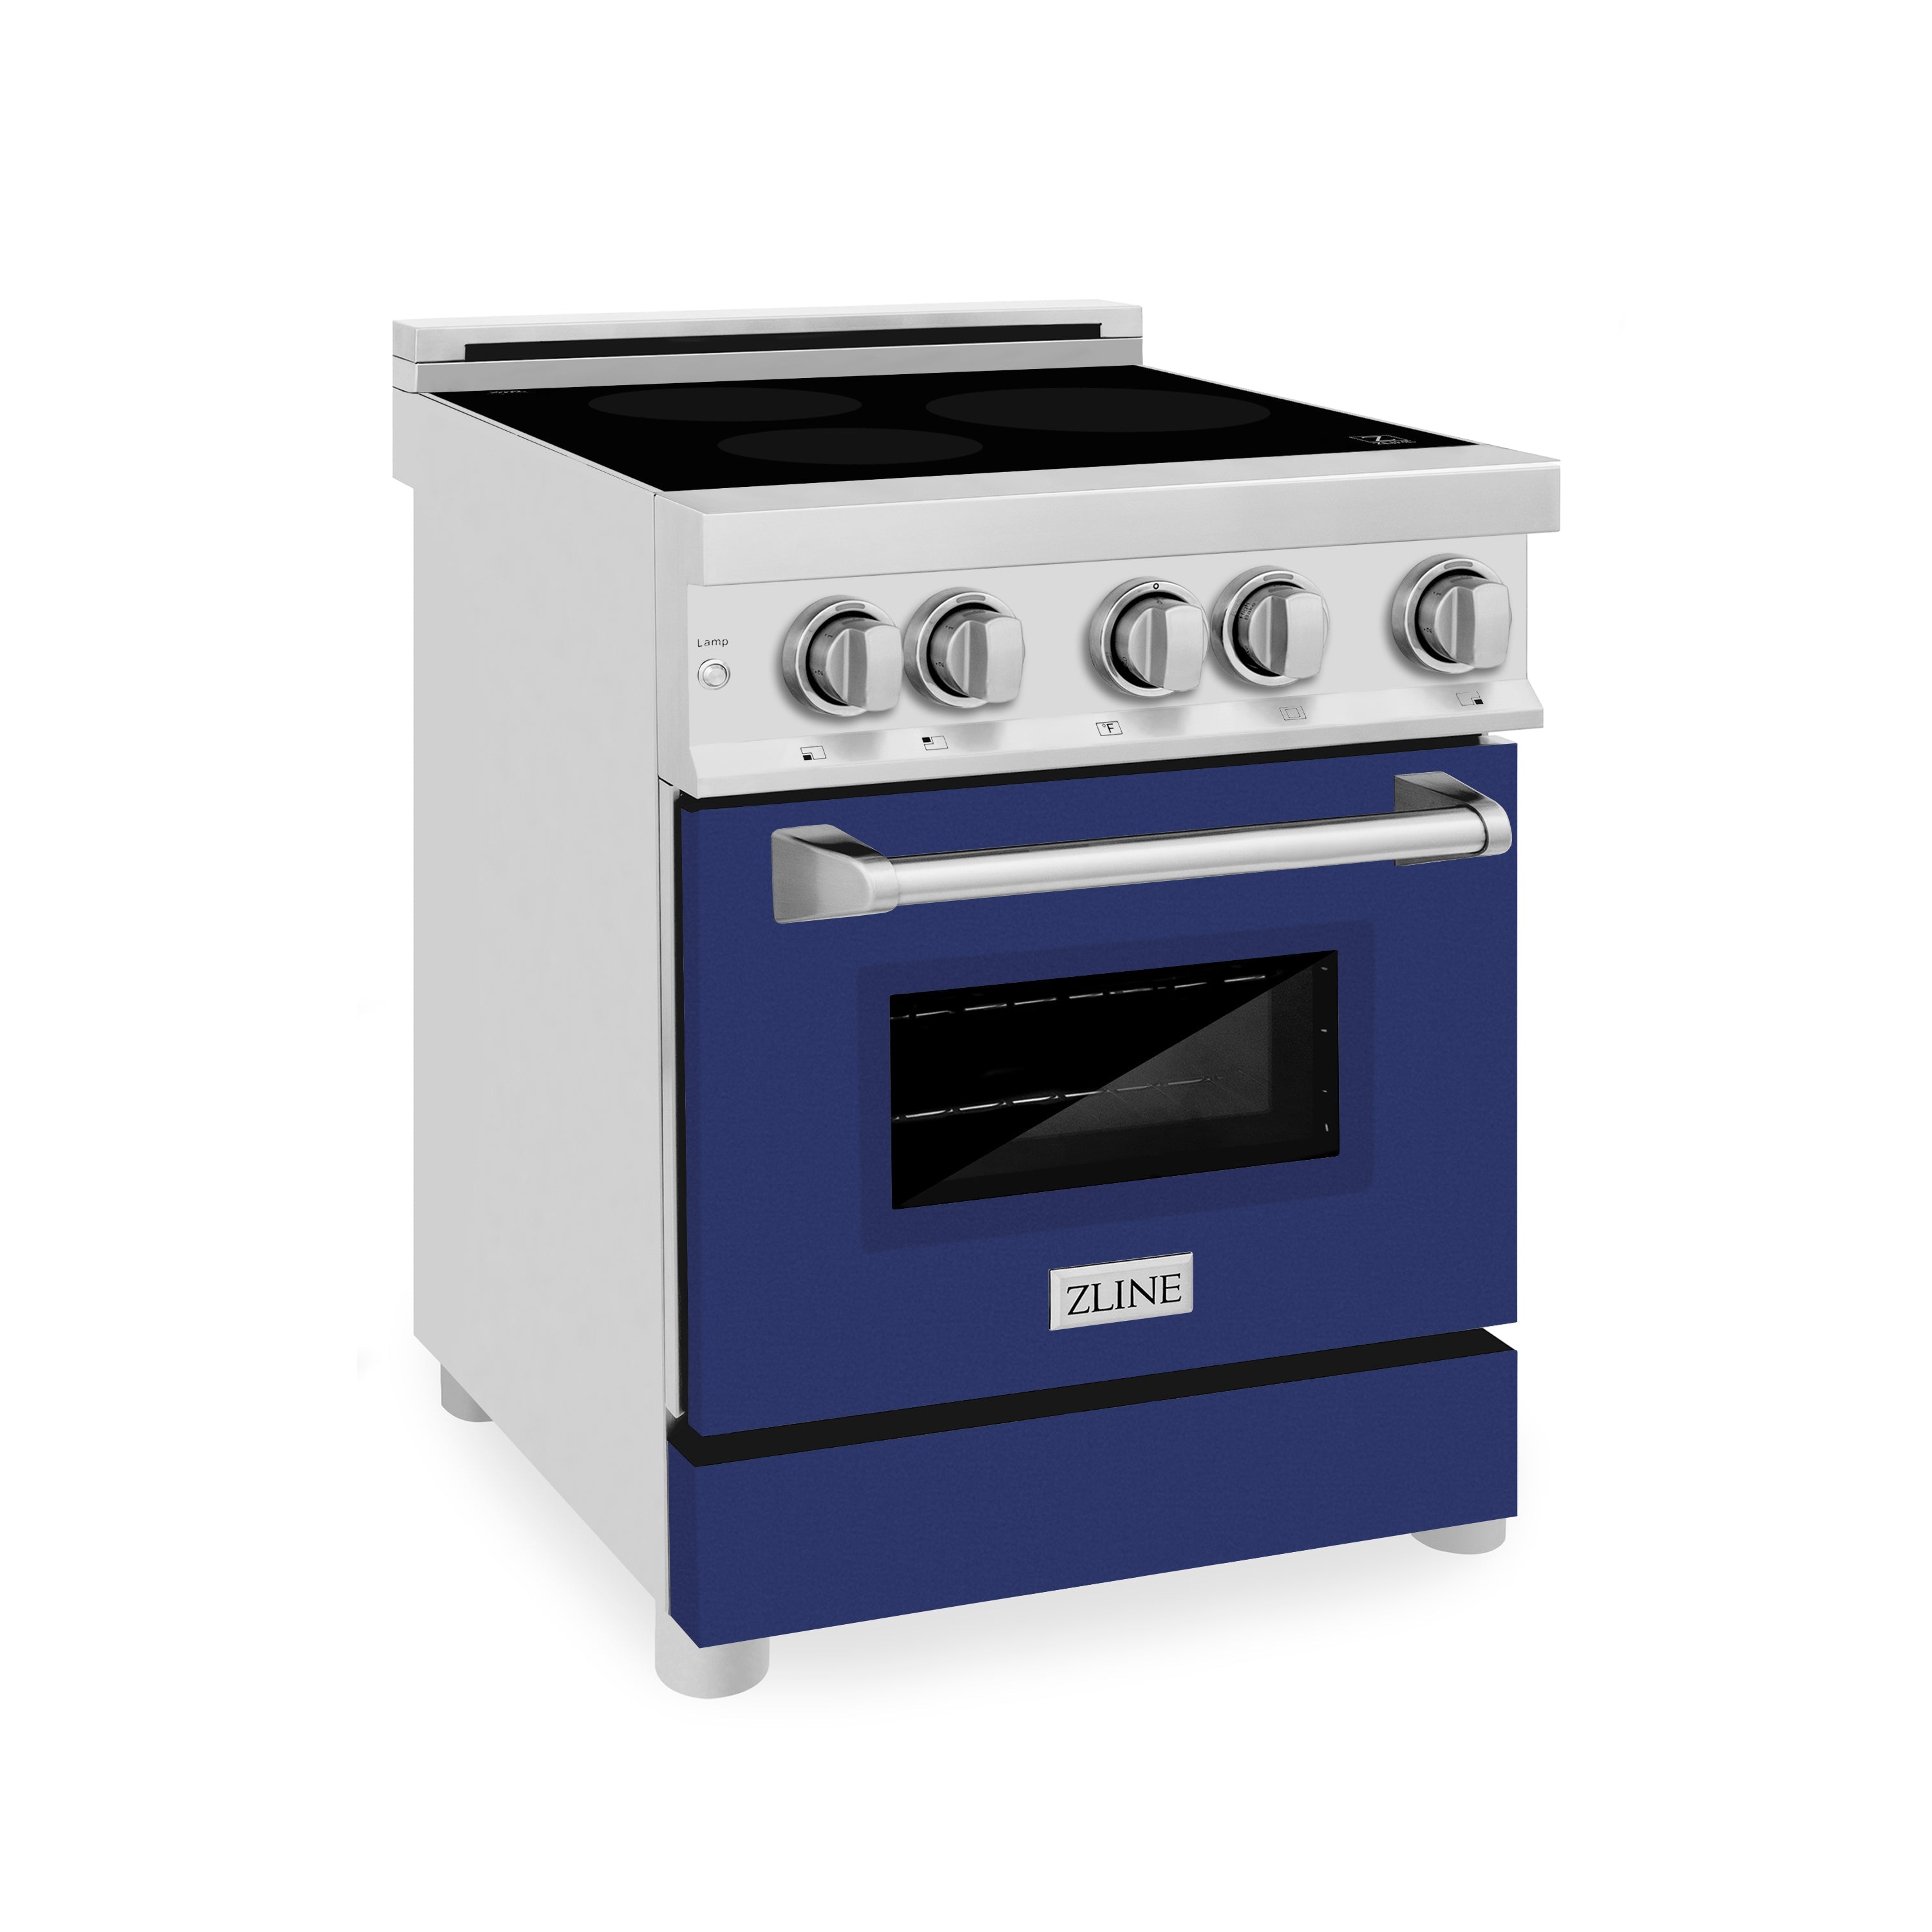 ZLINE 24" 2.8 cu. ft. Induction Range with a 3 Element Stove and Electric Oven in Blue Gloss (RAIND-BG-24)